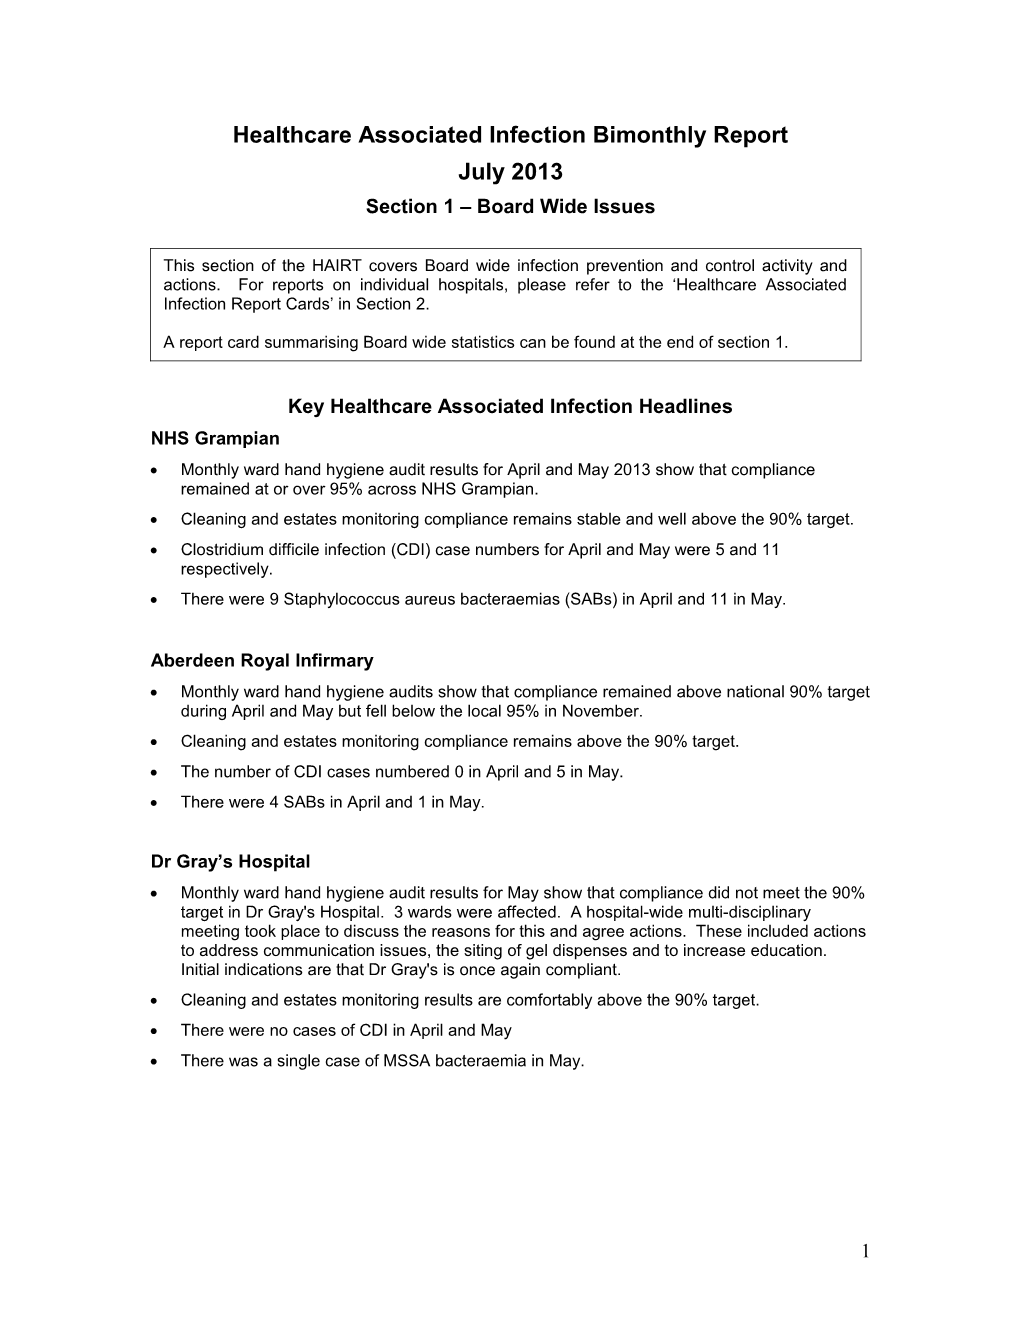 Healthcare Associated Infections Report July 2013